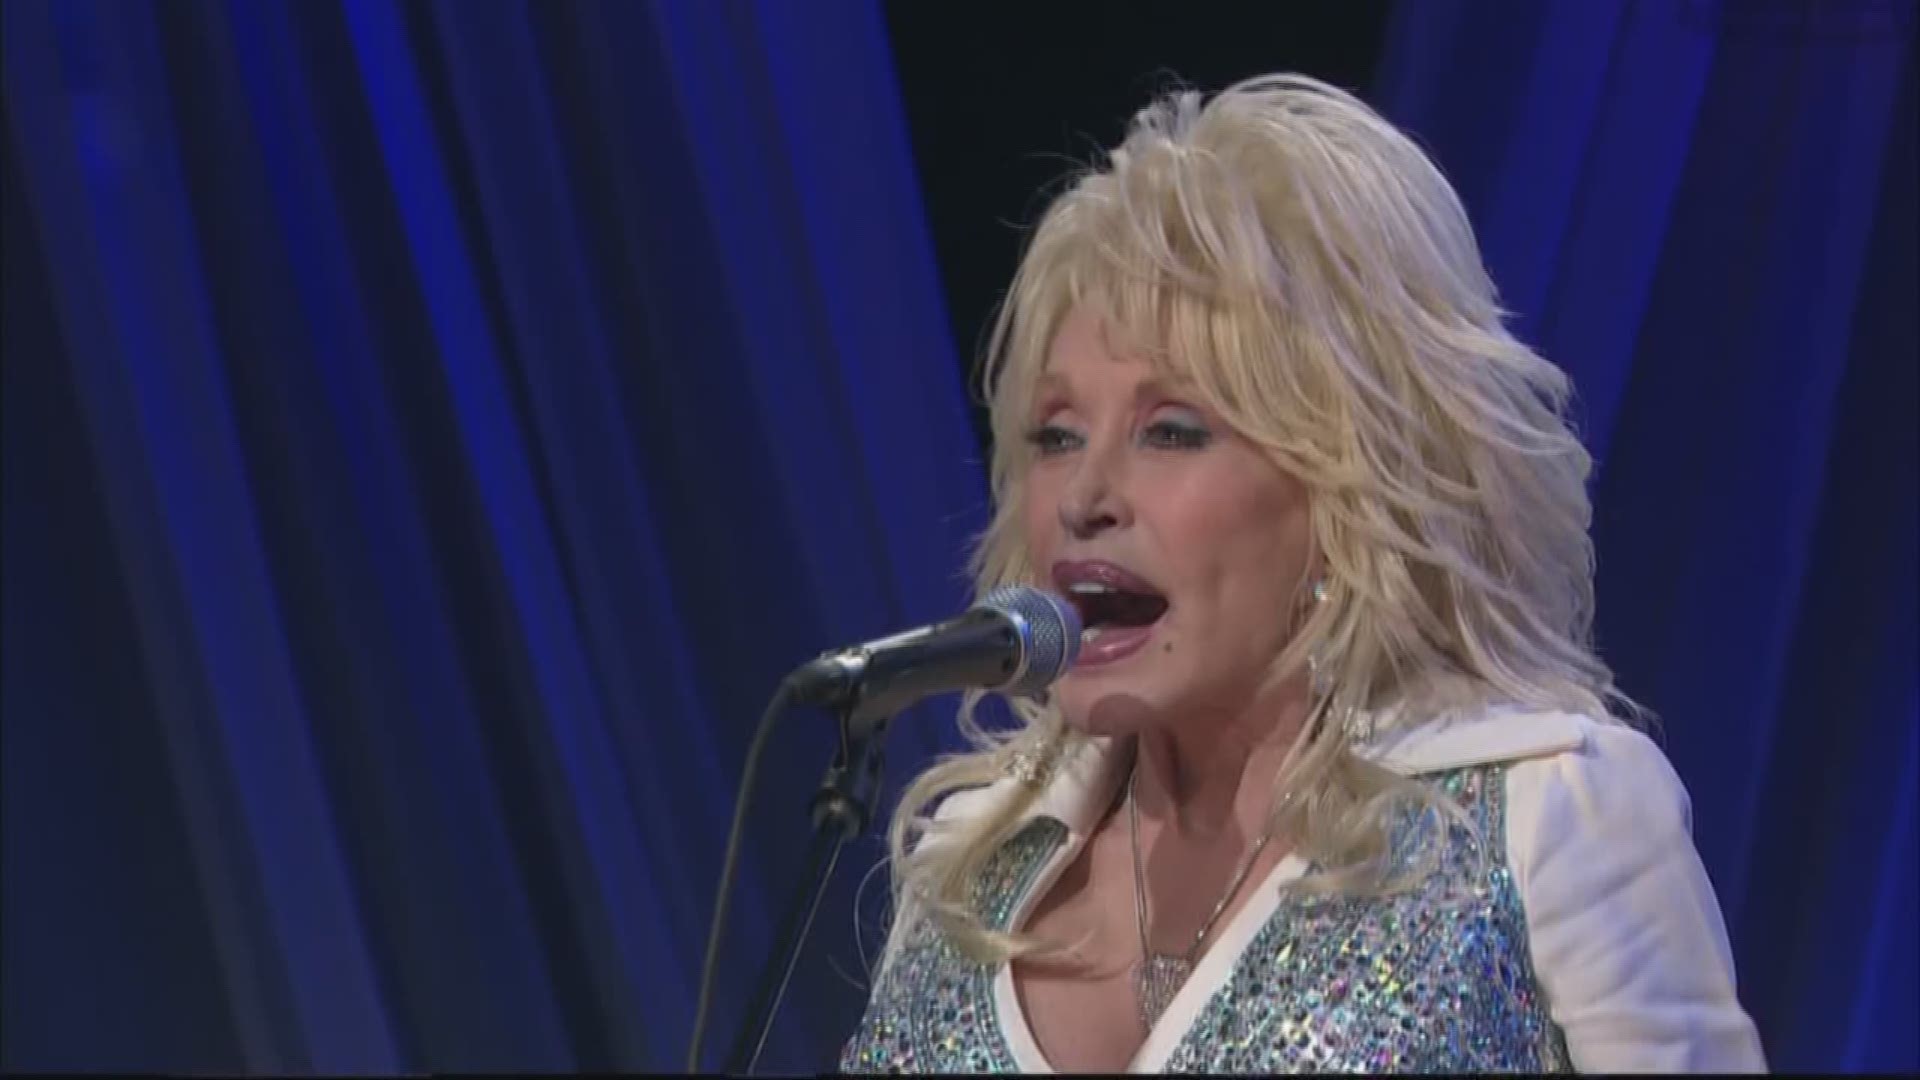 Dolly Parton performs on her Smoky Mountains Rise telethon to raise money for wildfire victims